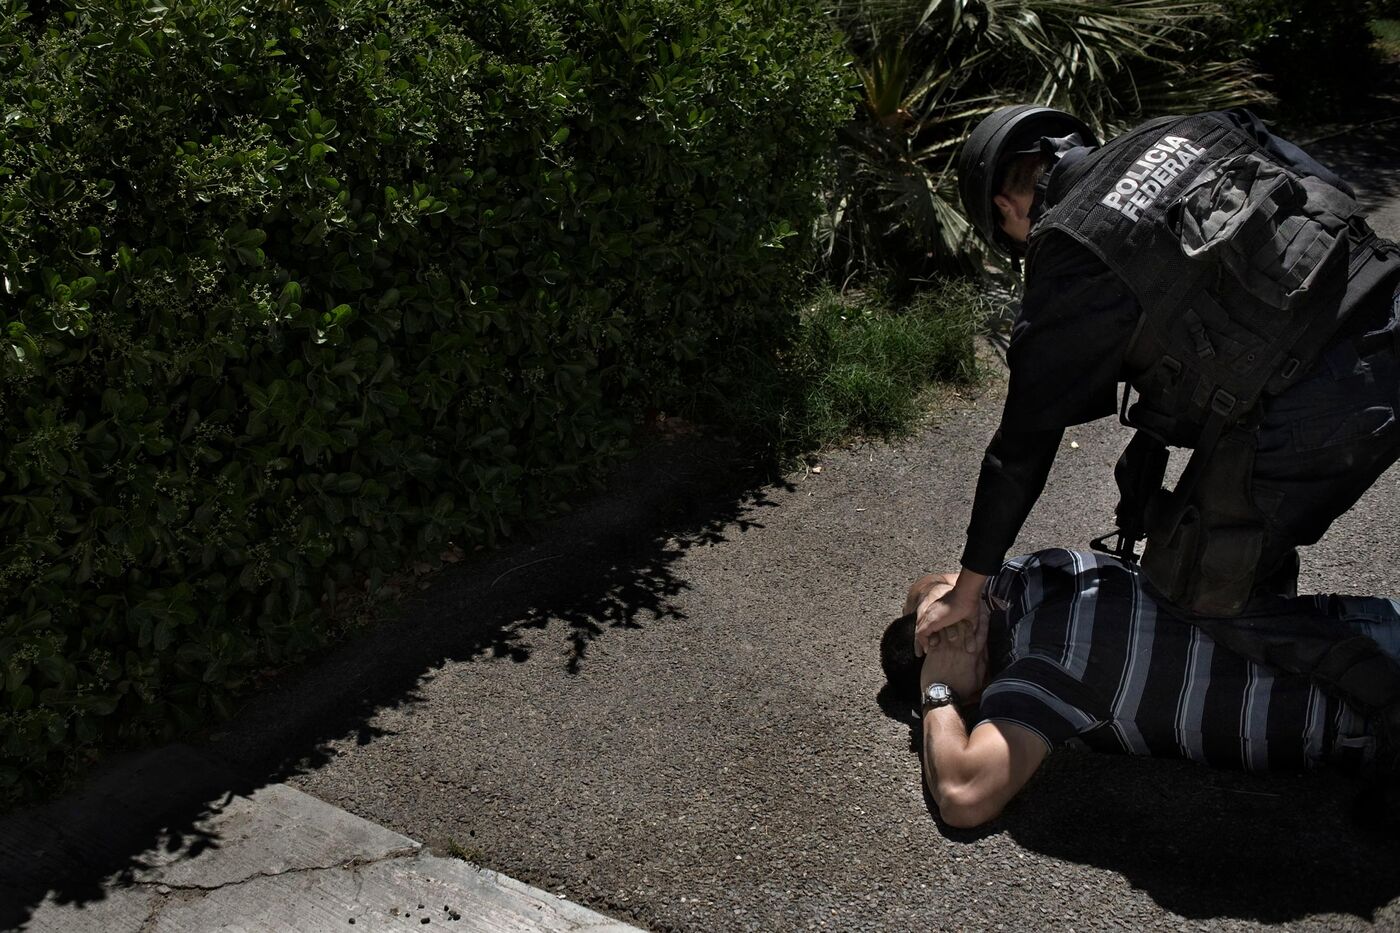 Mexican police detain a suspect in a crackdown on the Juarez Cartel.